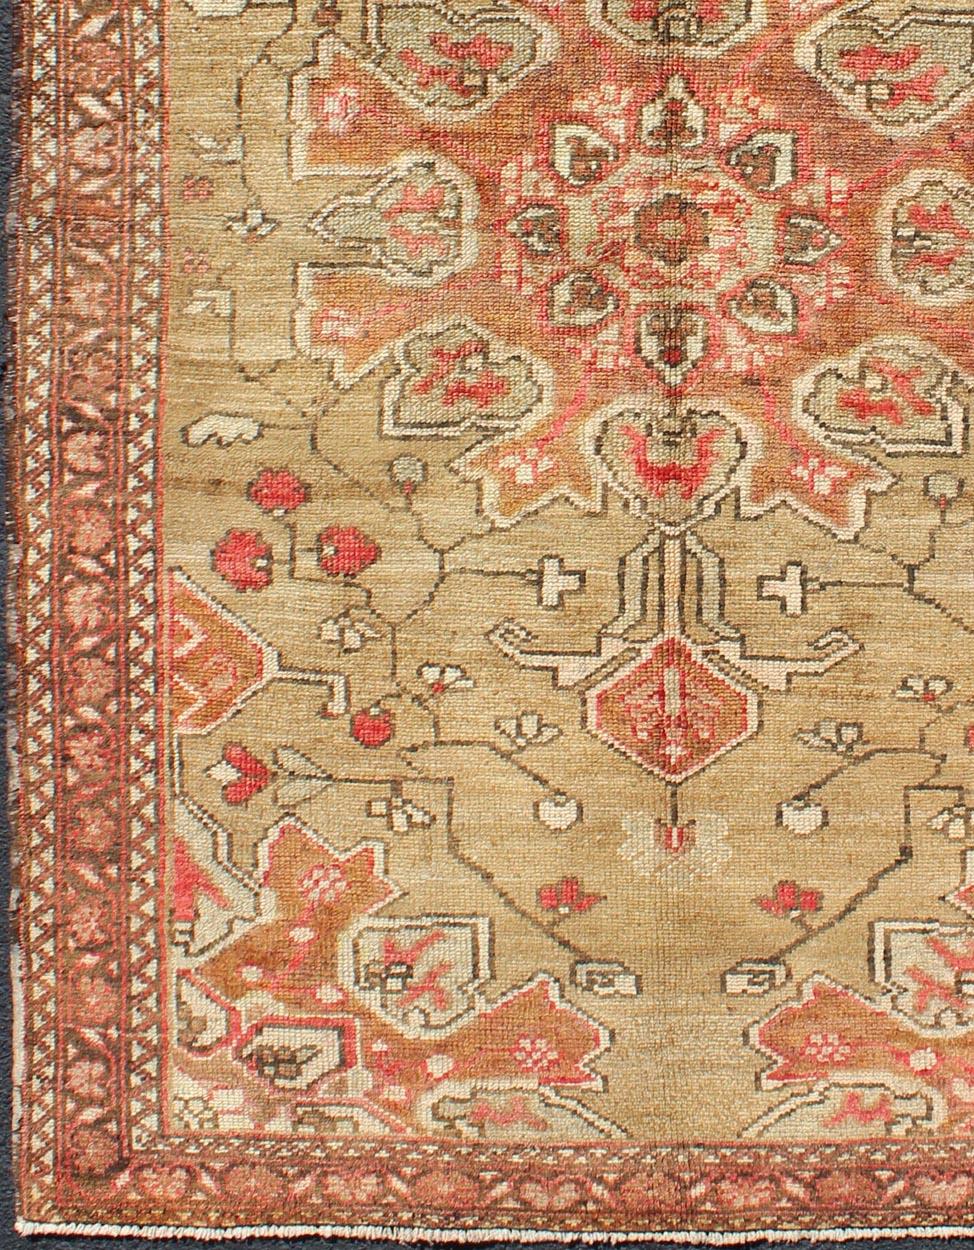 Vintage Tribal Persian, rug H-1006-08, country of origin / type: Persian / Tribal, circa mid-20th Century.

This gorgeous vintage Persian rug features a large-scale, multicolored light green, tan, brown and coral floral design complemented by a